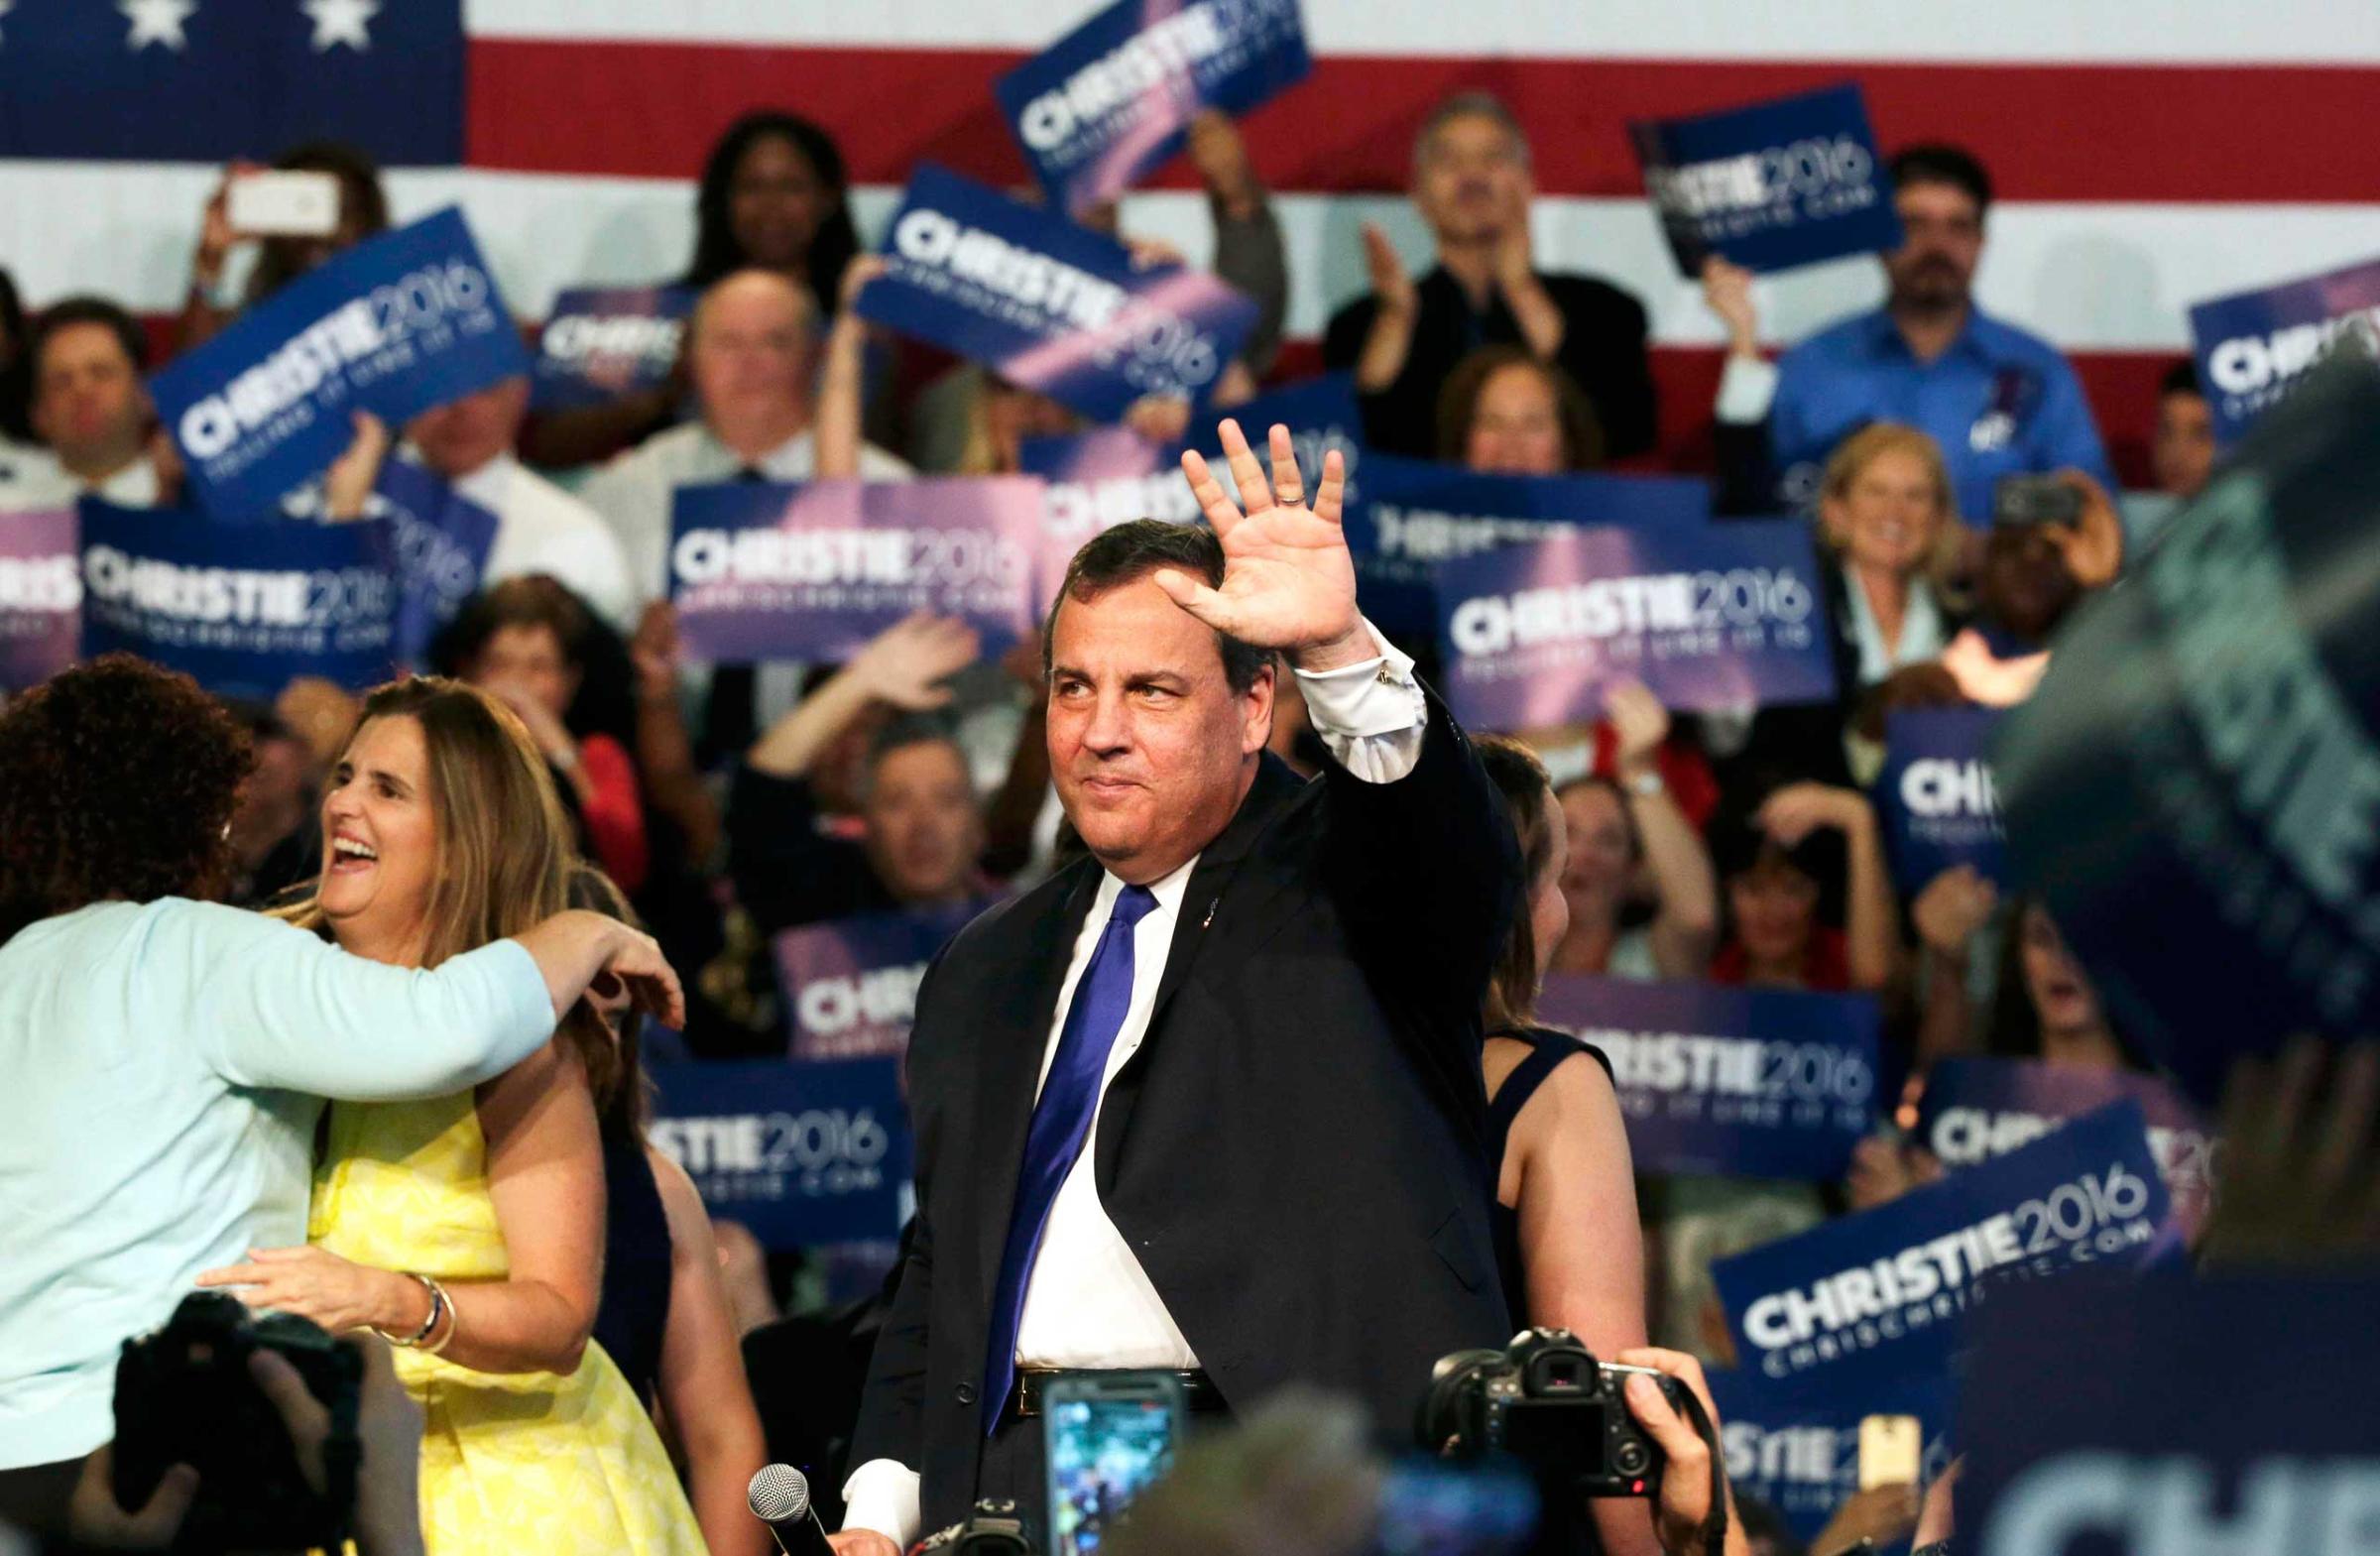 Republican U.S. presidential candidate and New Jersey Governor Chris Christie formally announces his campaign for the 2016 Republican presidential nomination in New Jersey